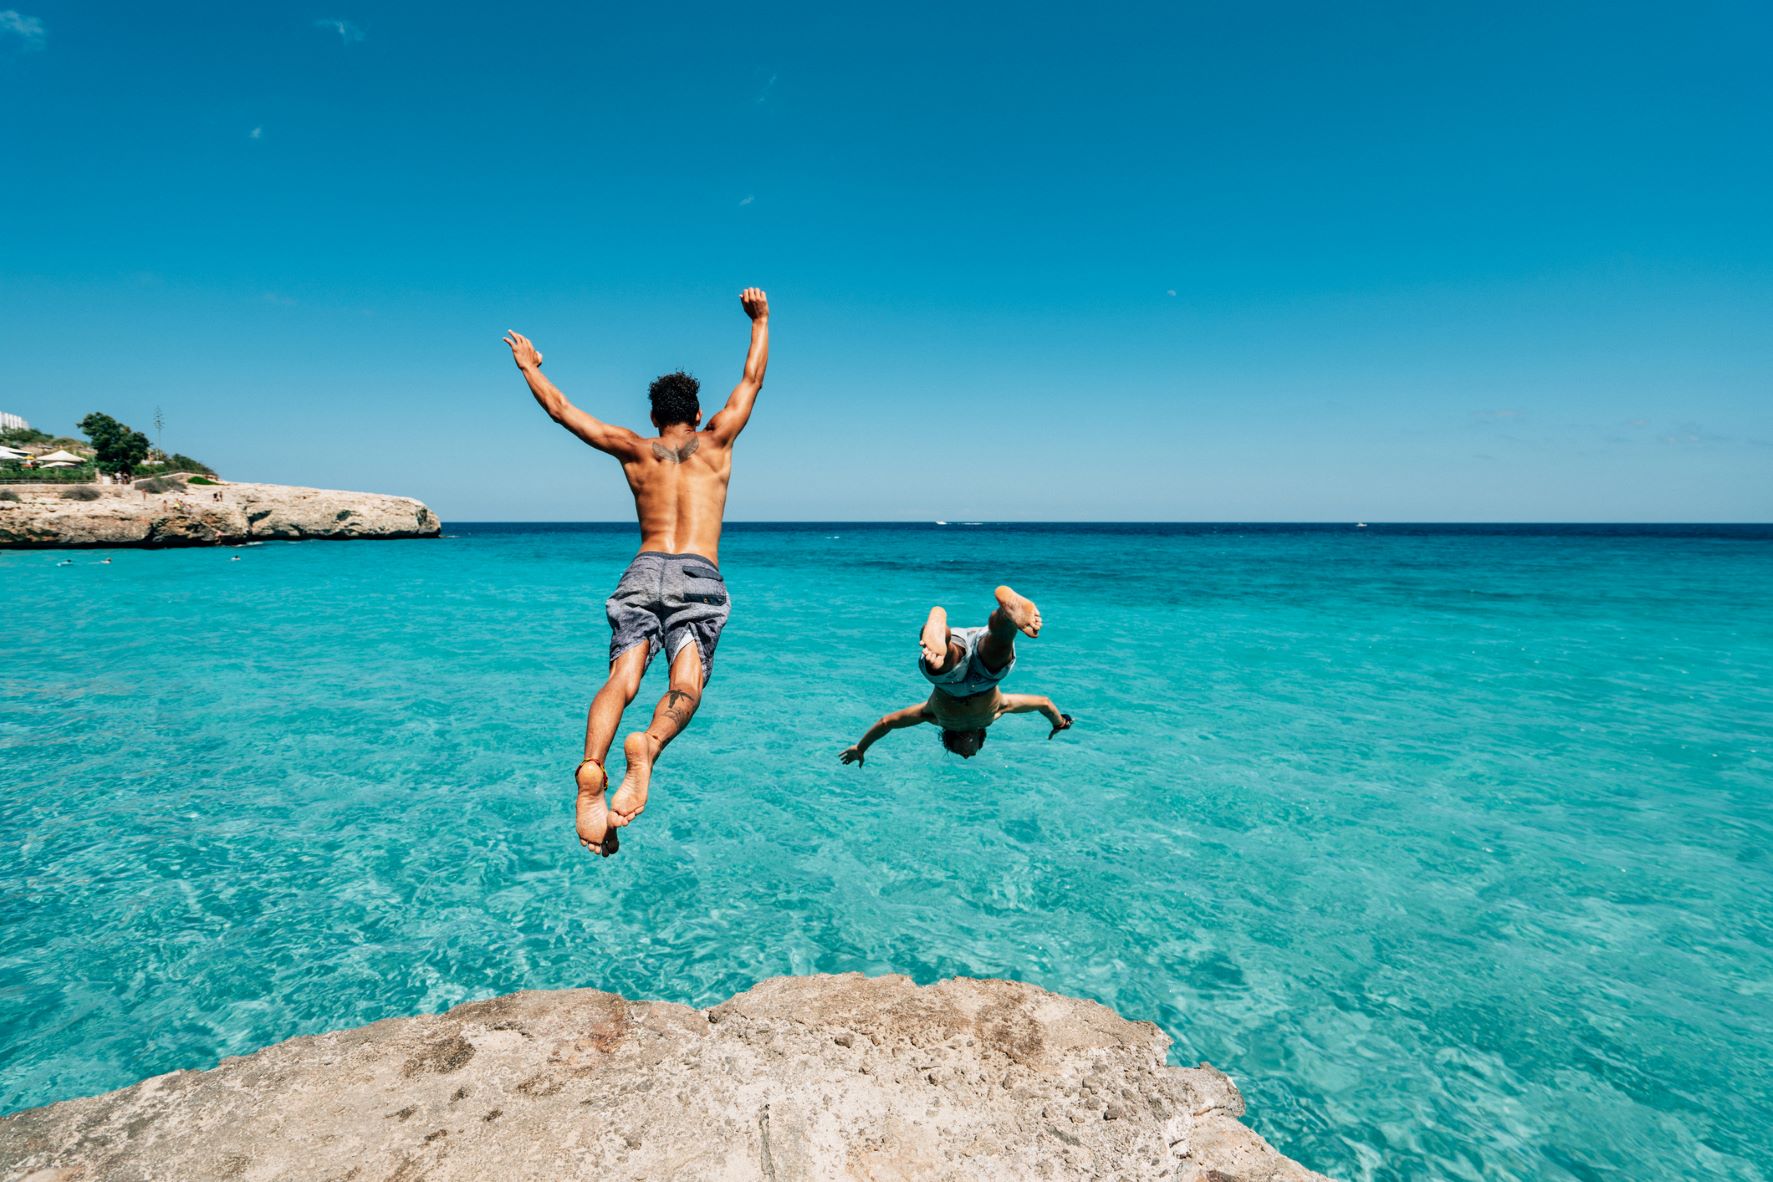 Two men are leaping into crystal-clear ocean waters. There's not a cloud in the sky.